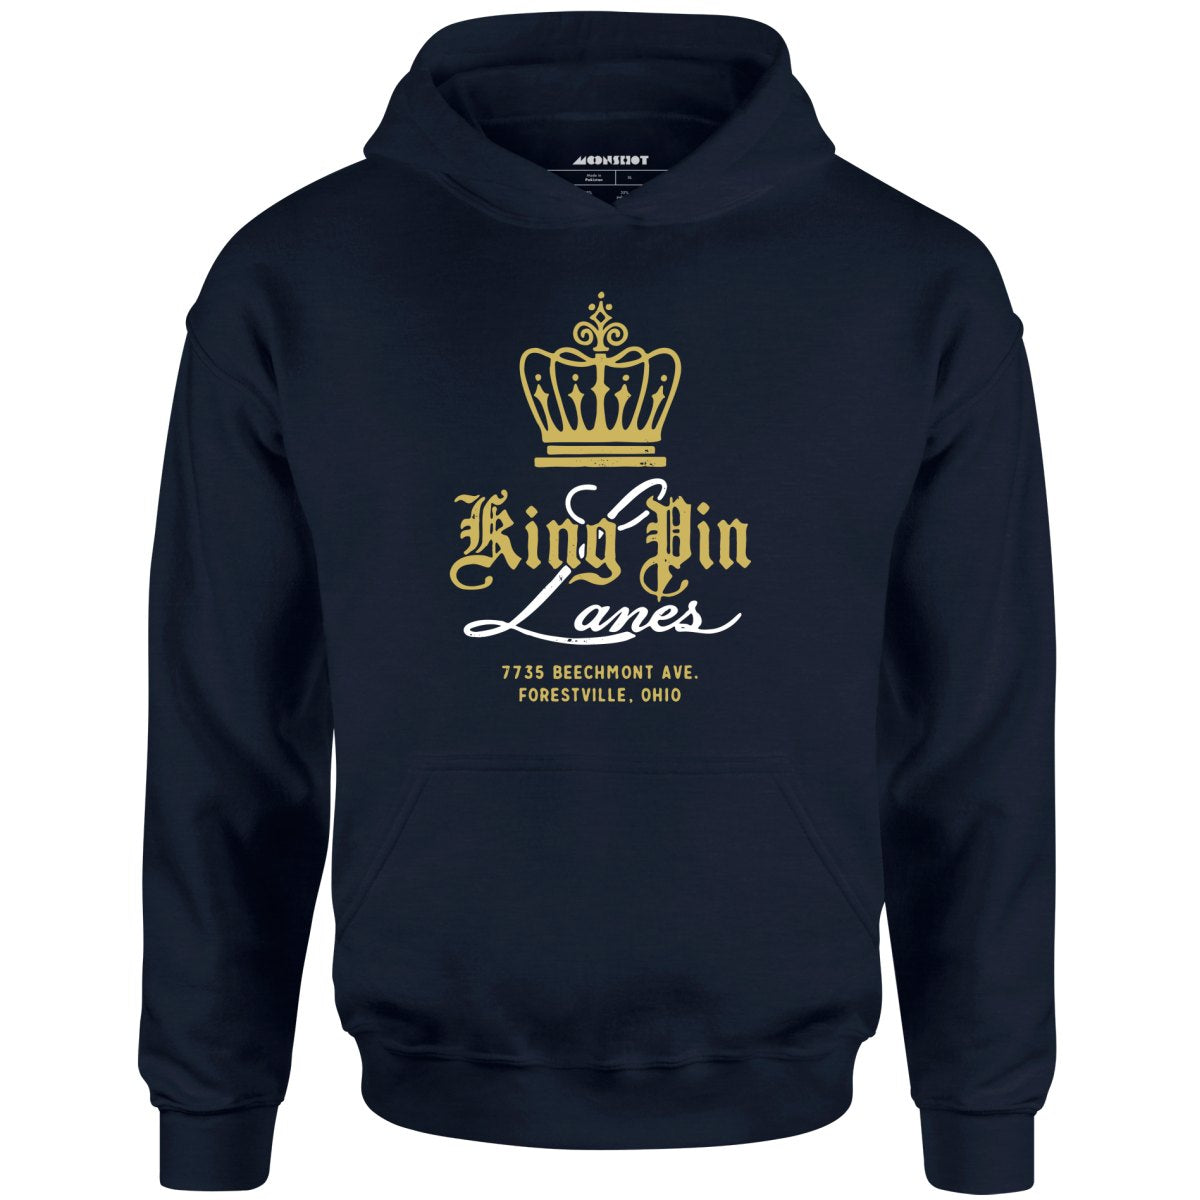 King Pin Lanes - Forestville, OH - Vintage Bowling Alley - Unisex Hoodie